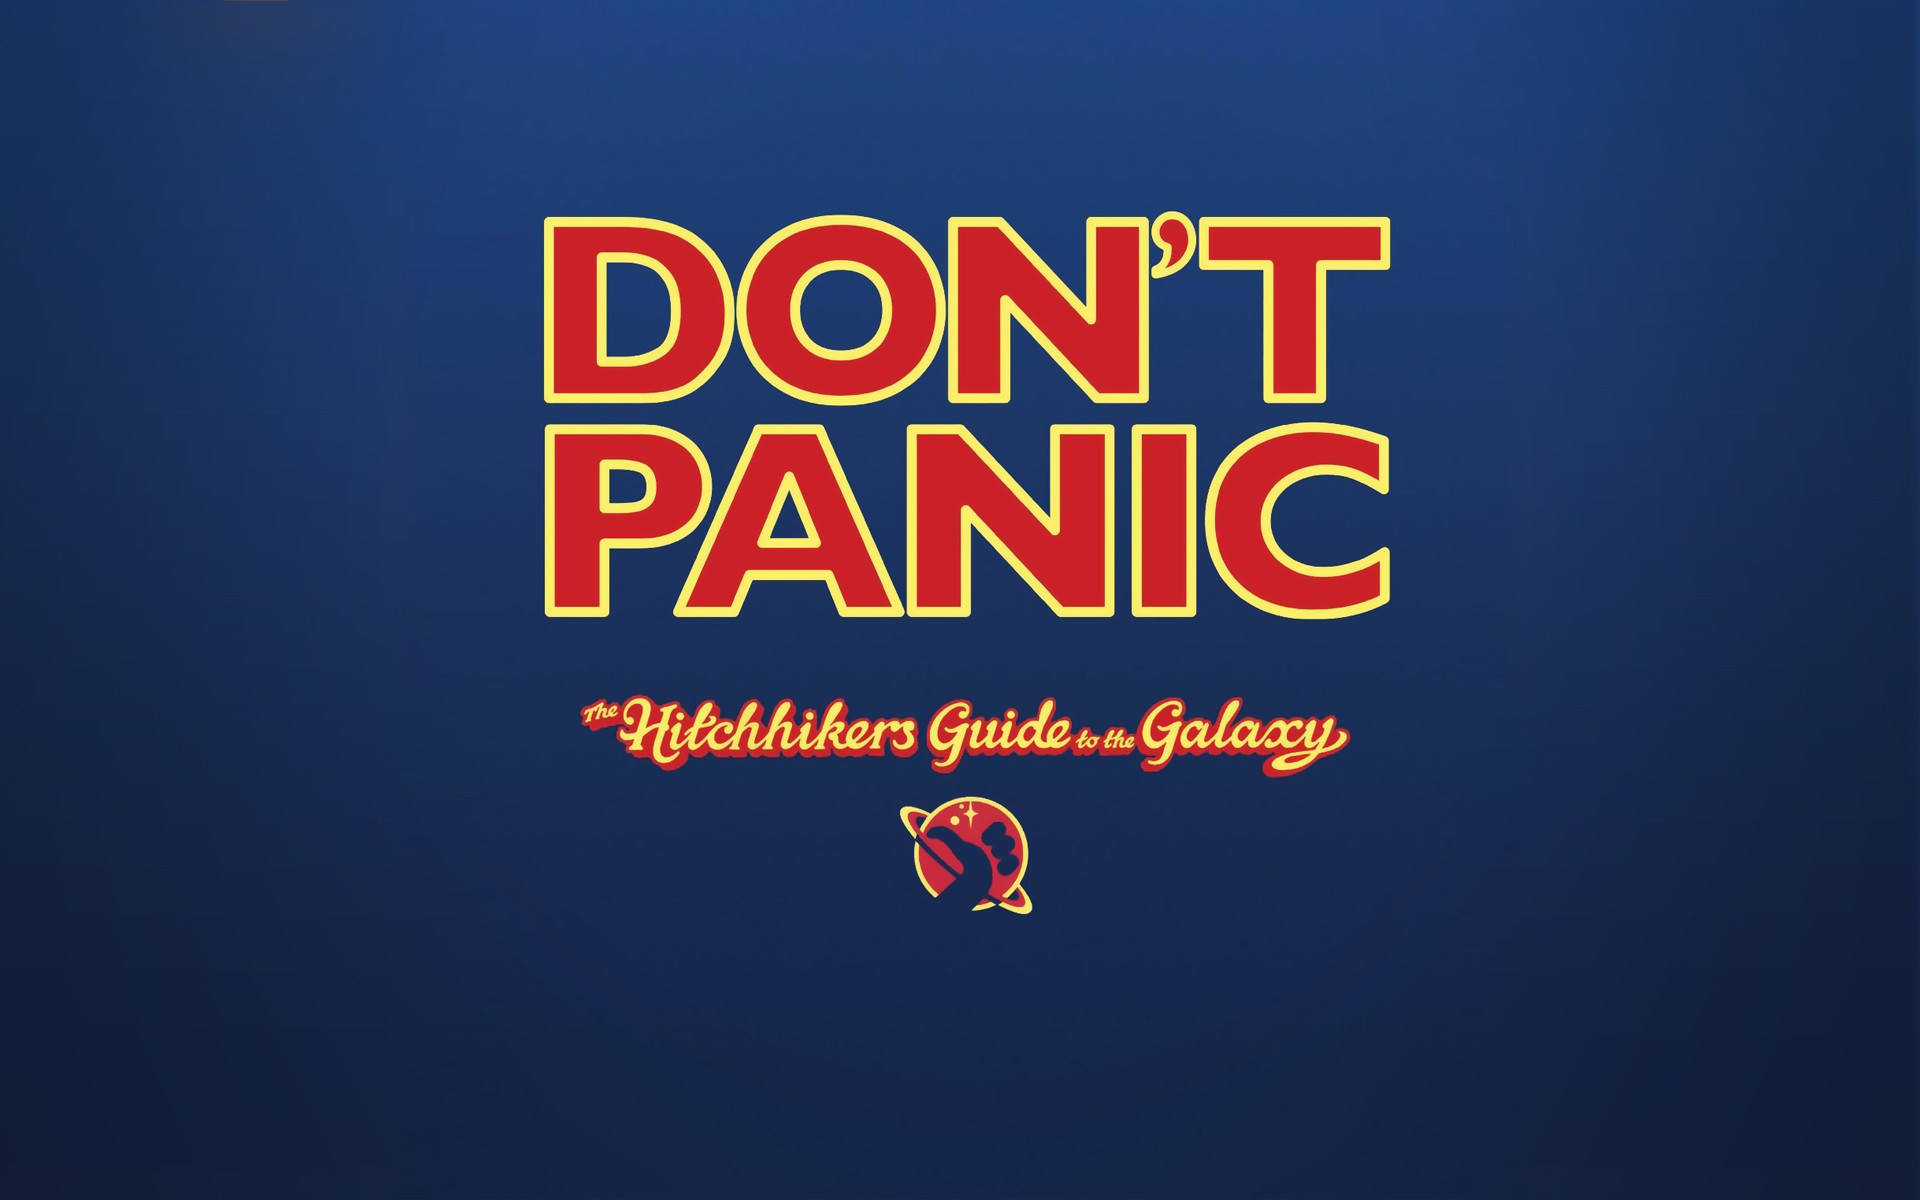 General 1920x1200 The Hitchhiker's Guide to the Galaxy Don't Panic humor typography minimalism science fiction blue background simple background